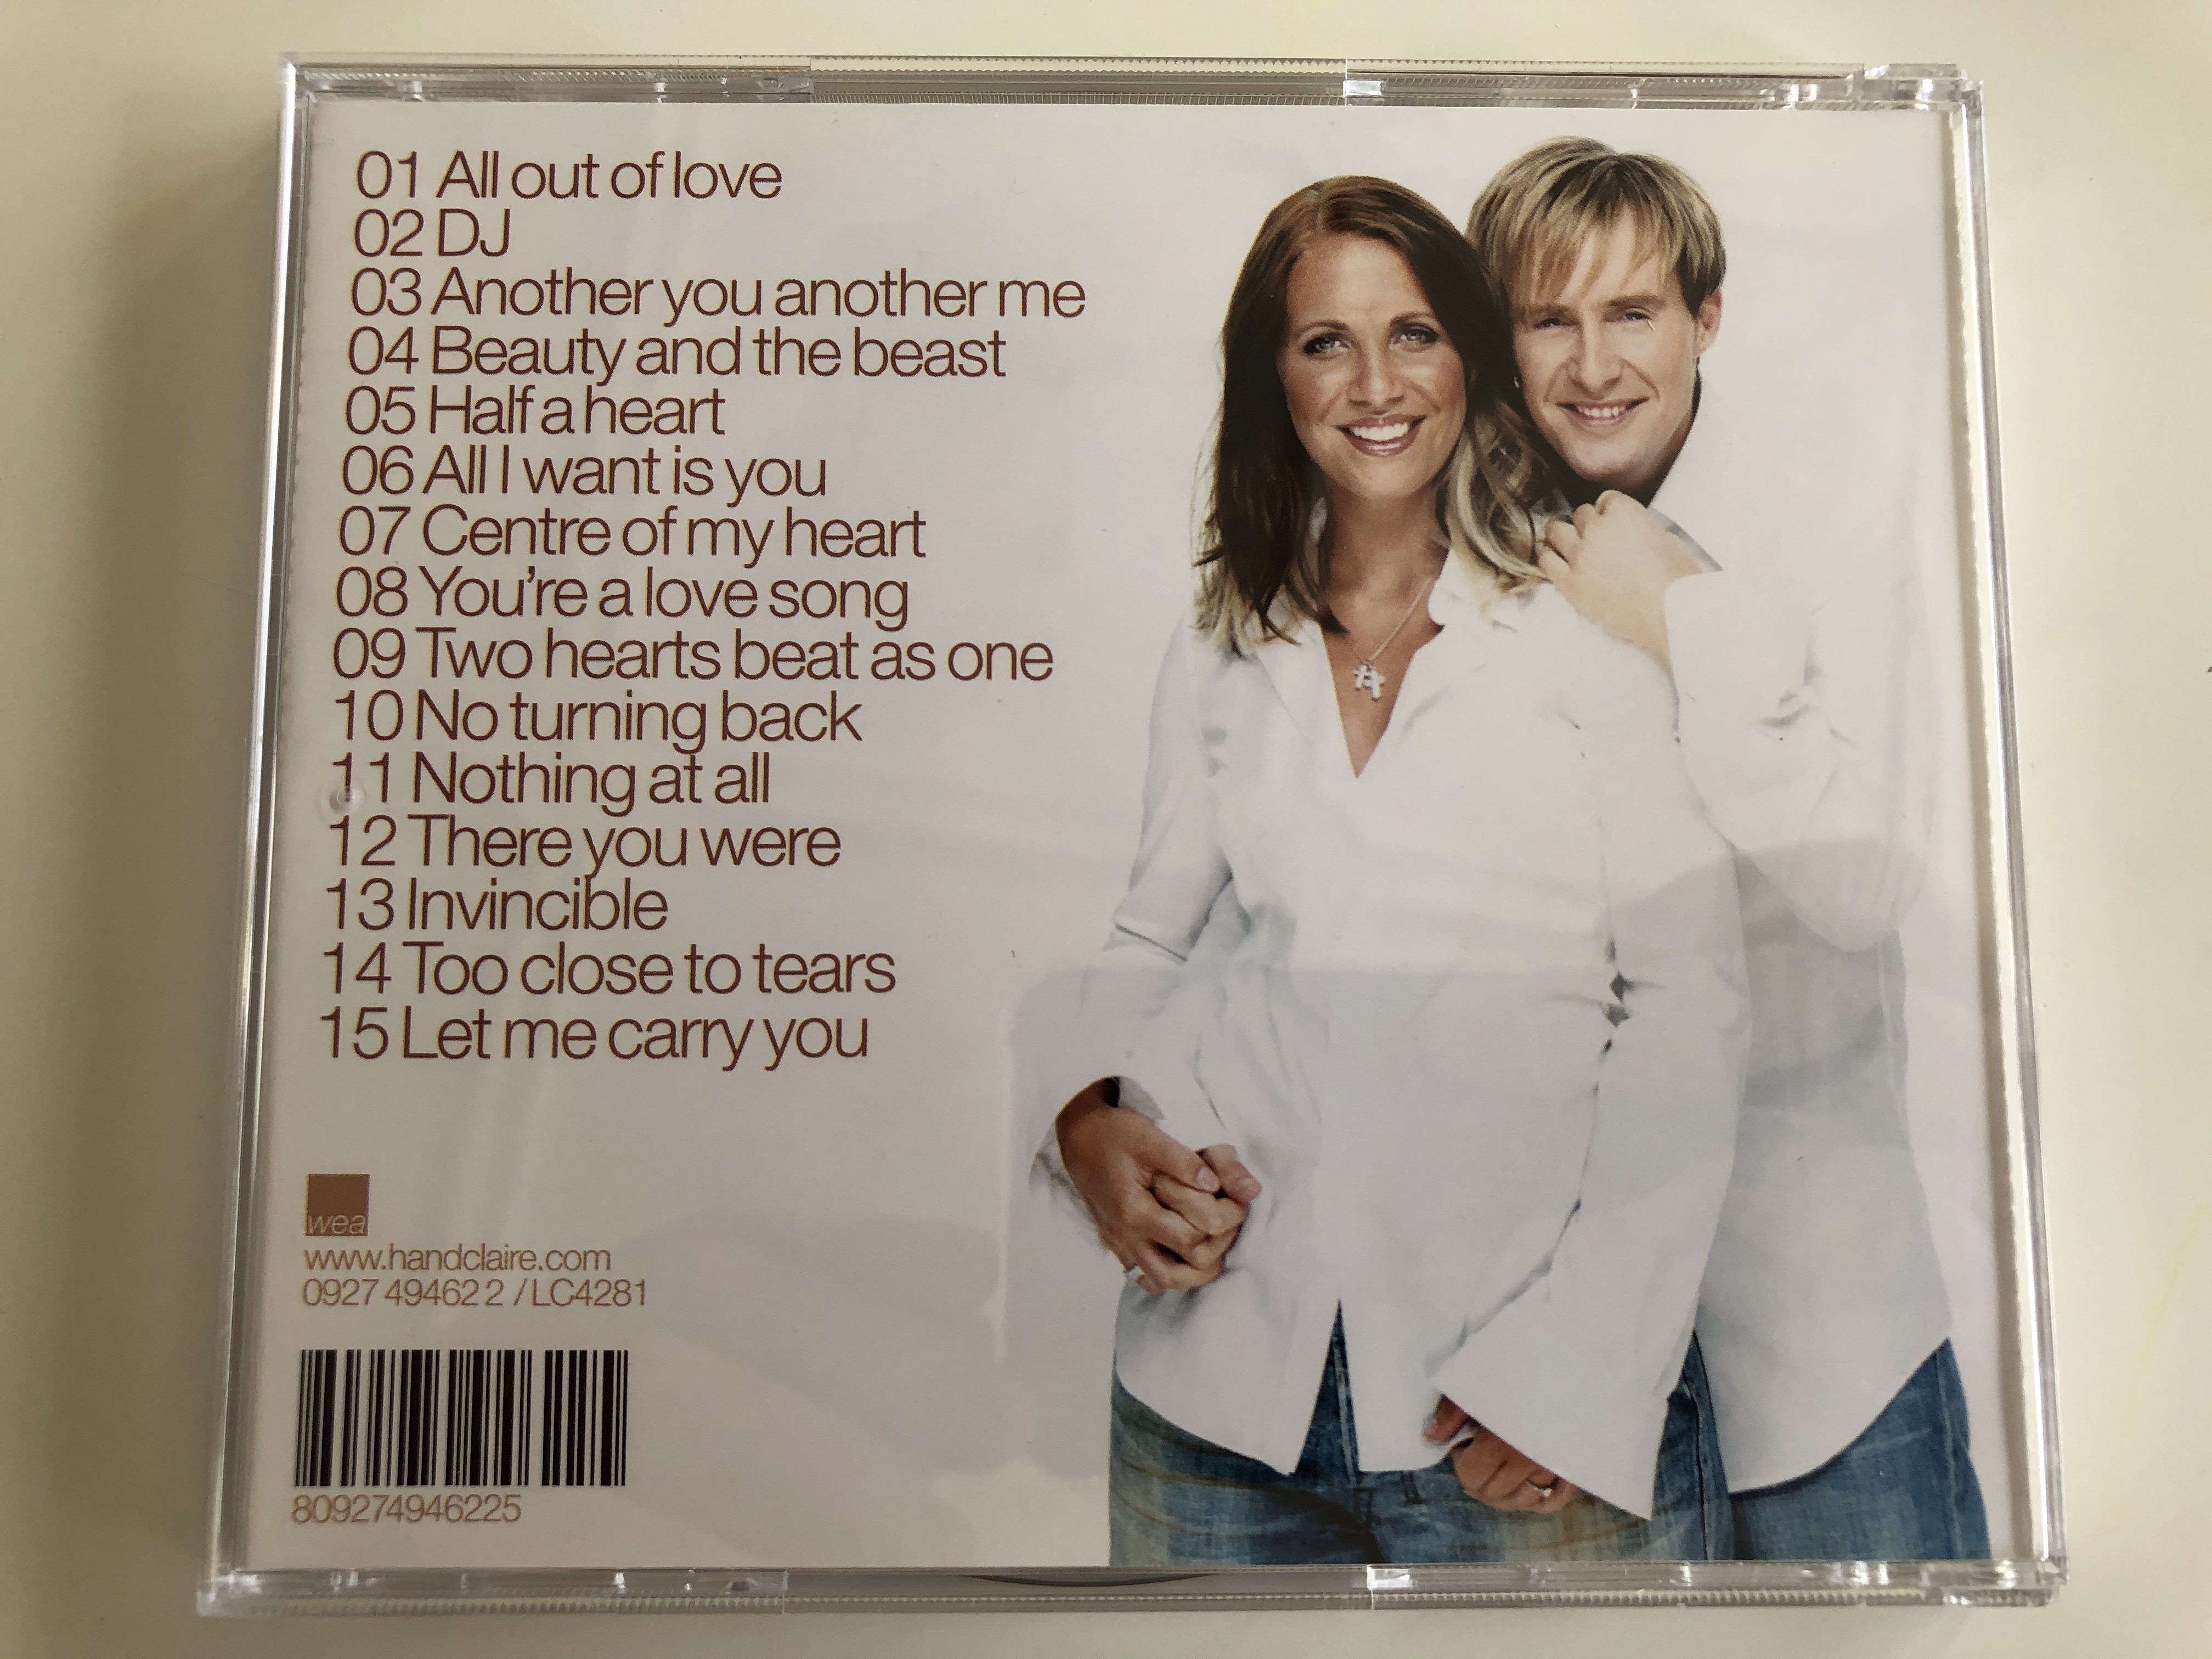 h-claire-another-you-another-me-wea-audio-cd-0927-49462-2-11-.jpg